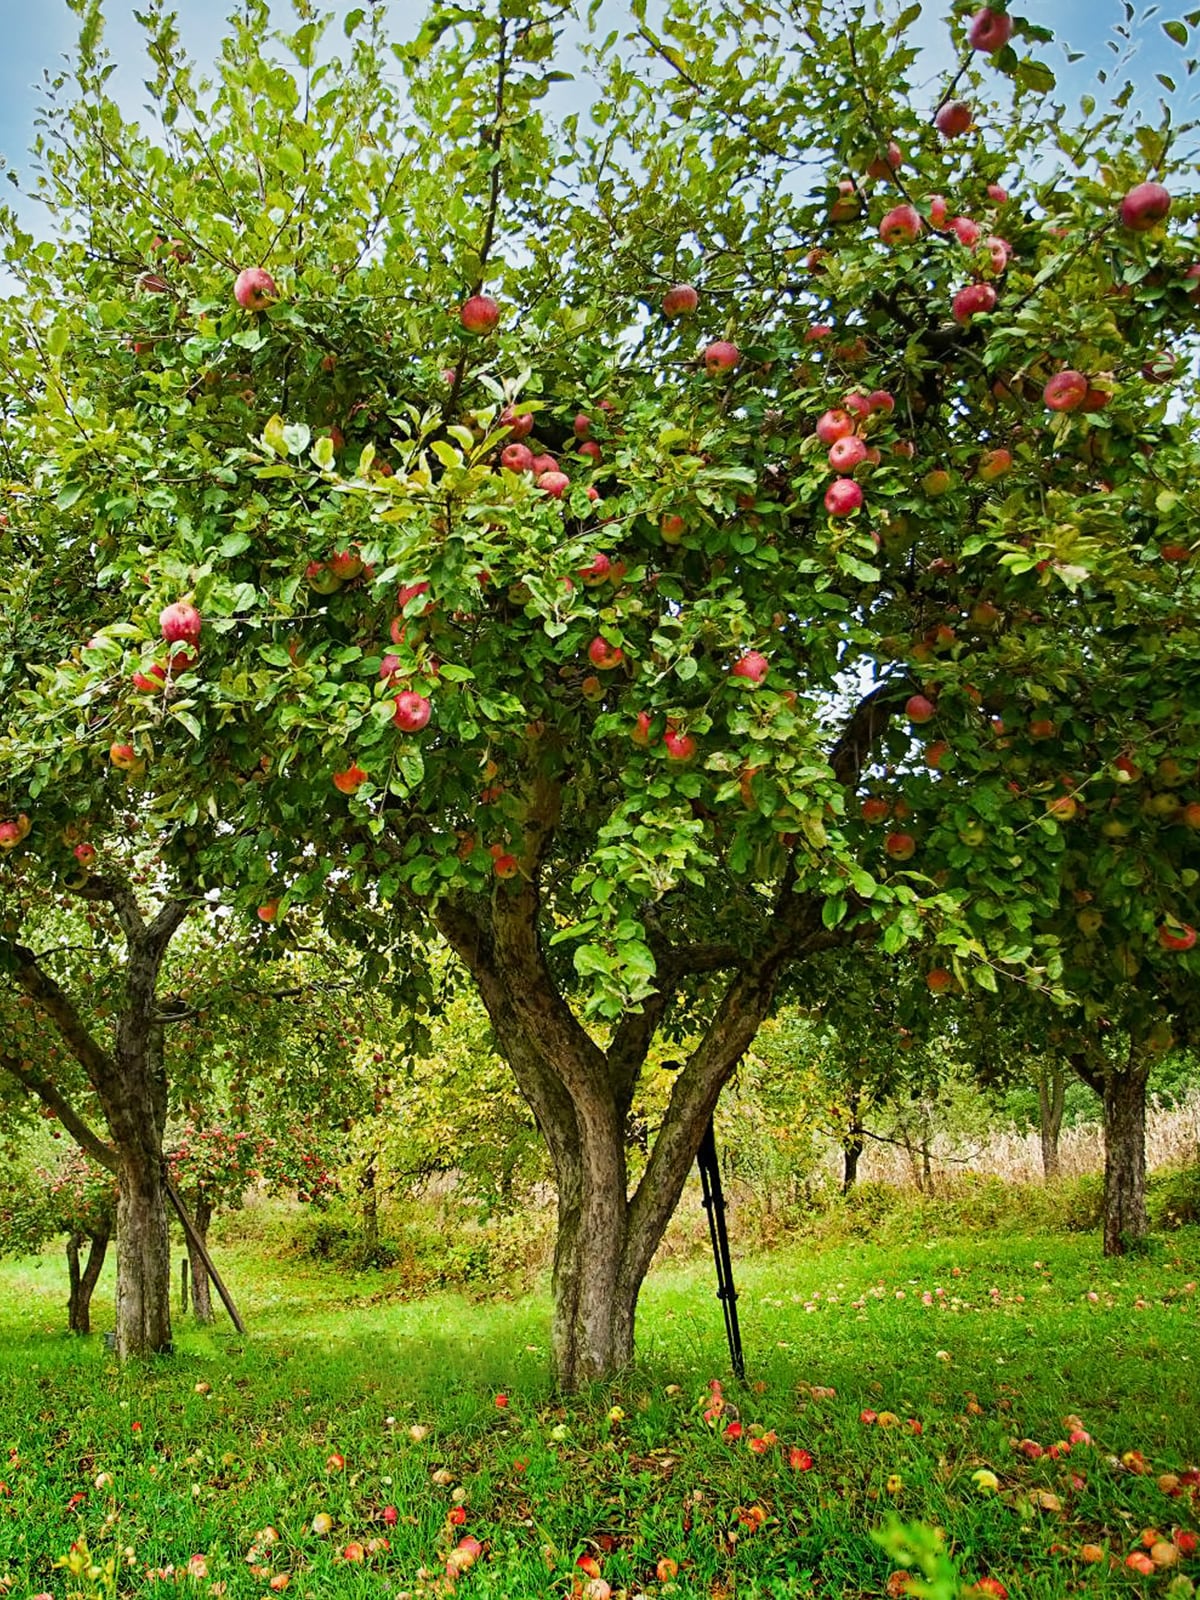 Gala Apple Trees for Sale